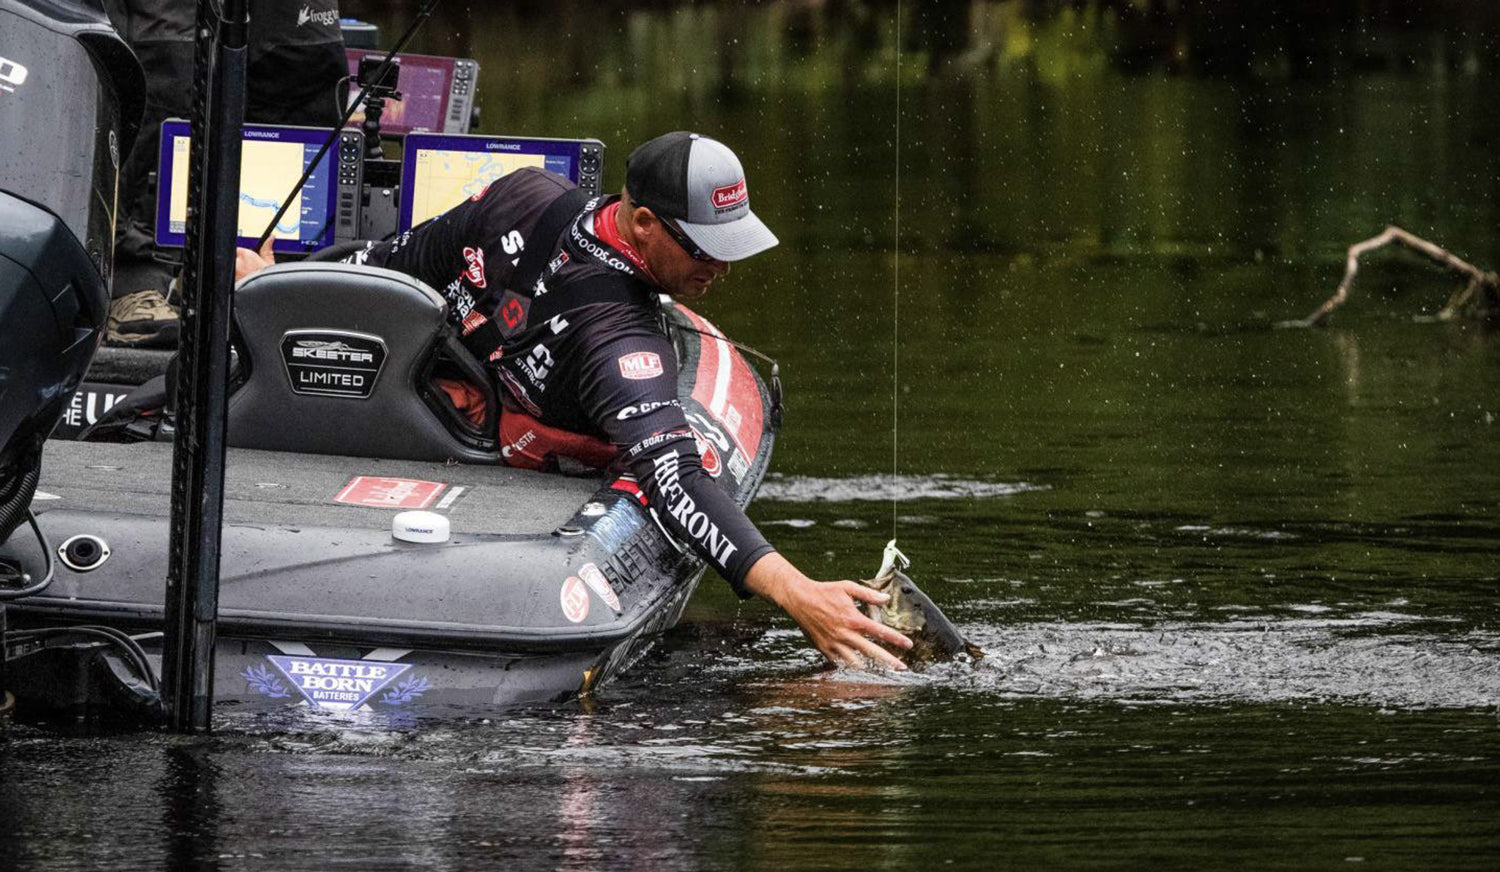 Top 3 rod builds to catch more prespawn bass